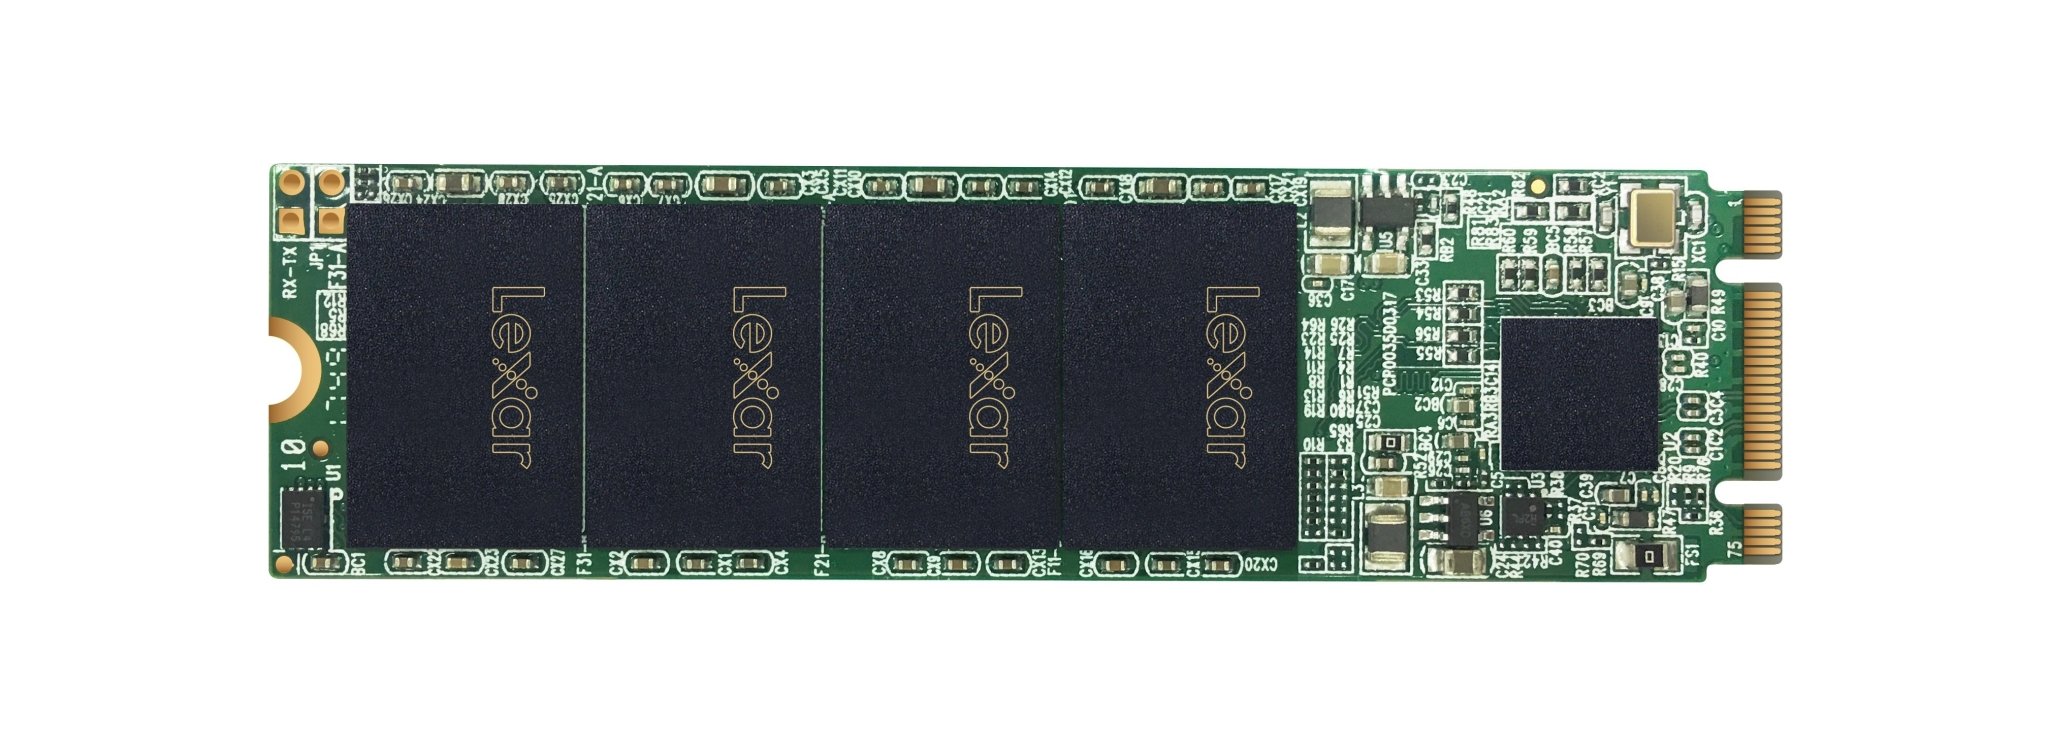 128GB Impressive Speed SSD, up to 550 MB/s read and 440 MB/s